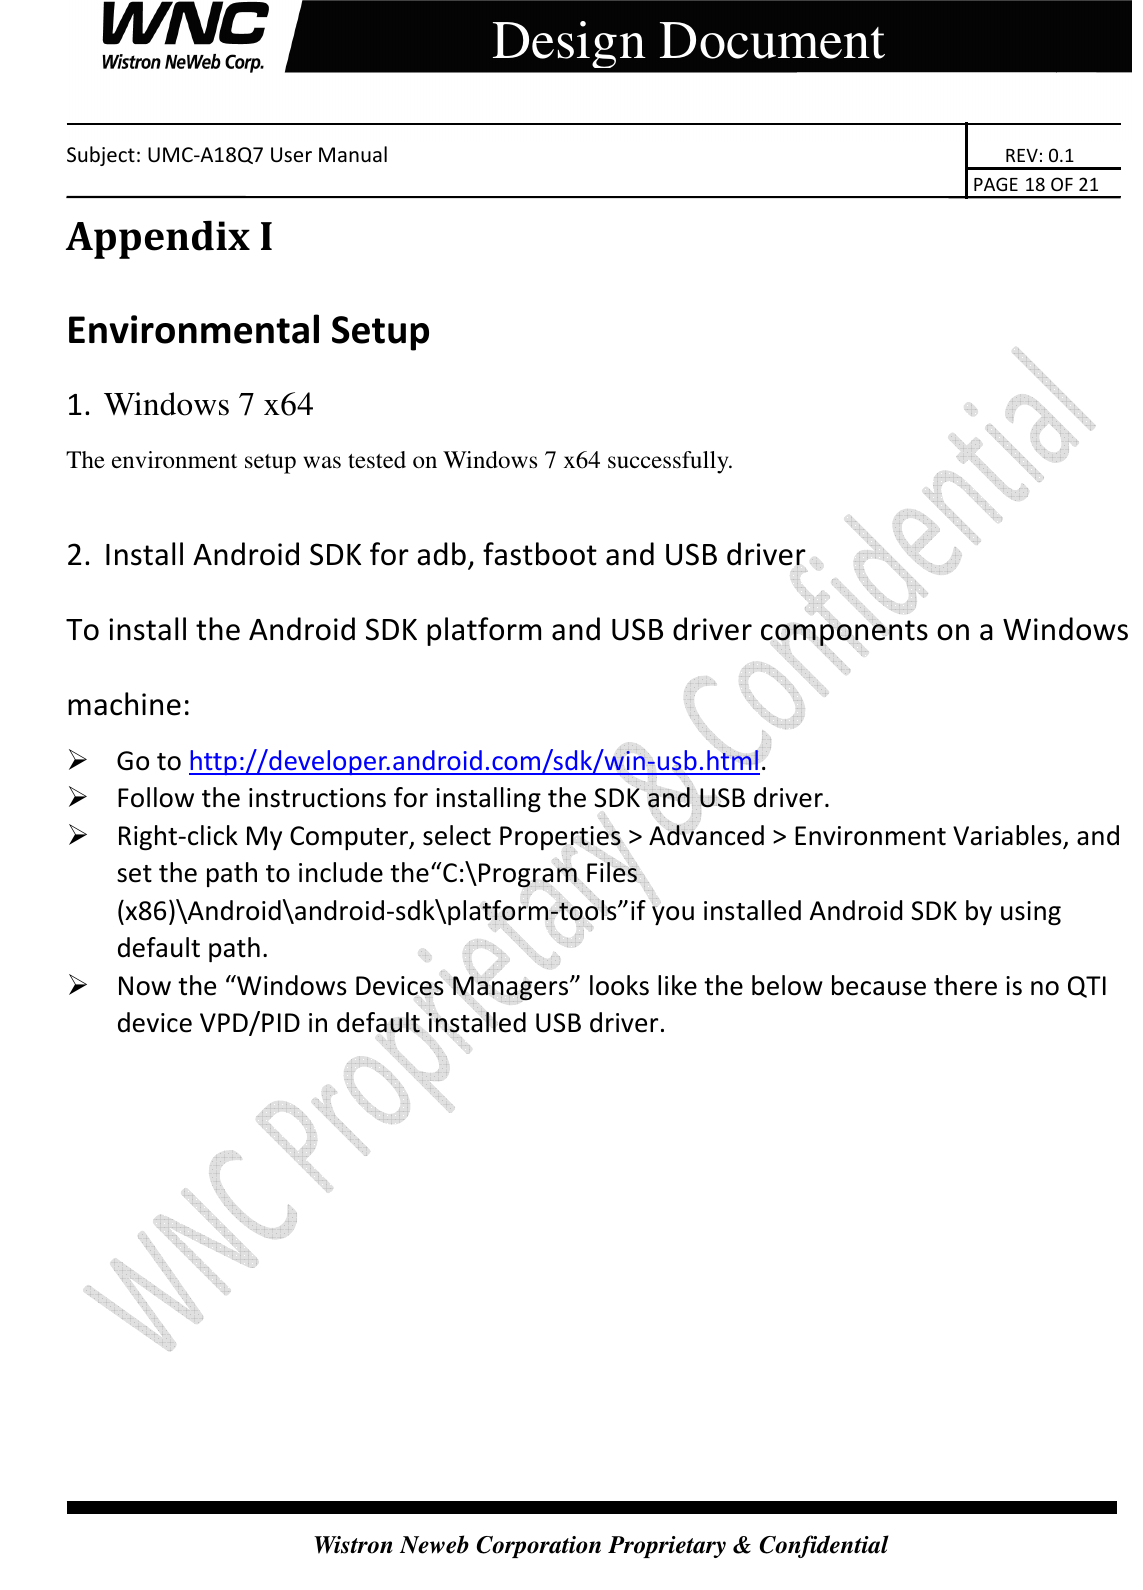    Subject: UMC-A18Q7 User Manual                                                                       REV: 0.1                                                                                                                                                                               PAGE 18 OF 21  Wistron Neweb Corporation Proprietary &amp; Confidential     Design Document Appendix I Environmental Setup 1. Windows 7 x64 The environment setup was tested on Windows 7 x64 successfully.  2. Install Android SDK for adb, fastboot and USB driver To install the Android SDK platform and USB driver components on a Windows machine:  Go to http://developer.android.com/sdk/win-usb.html.  Follow the instructions for installing the SDK and USB driver.  Right-click My Computer, select Properties &gt; Advanced &gt; Environment Variables, and set the path to include the“C:\Program Files (x86)\Android\android-sdk\platform-tools”if you installed Android SDK by using default path.  Now the “Windows Devices Managers” looks like the below because there is no QTI device VPD/PID in default installed USB driver. 